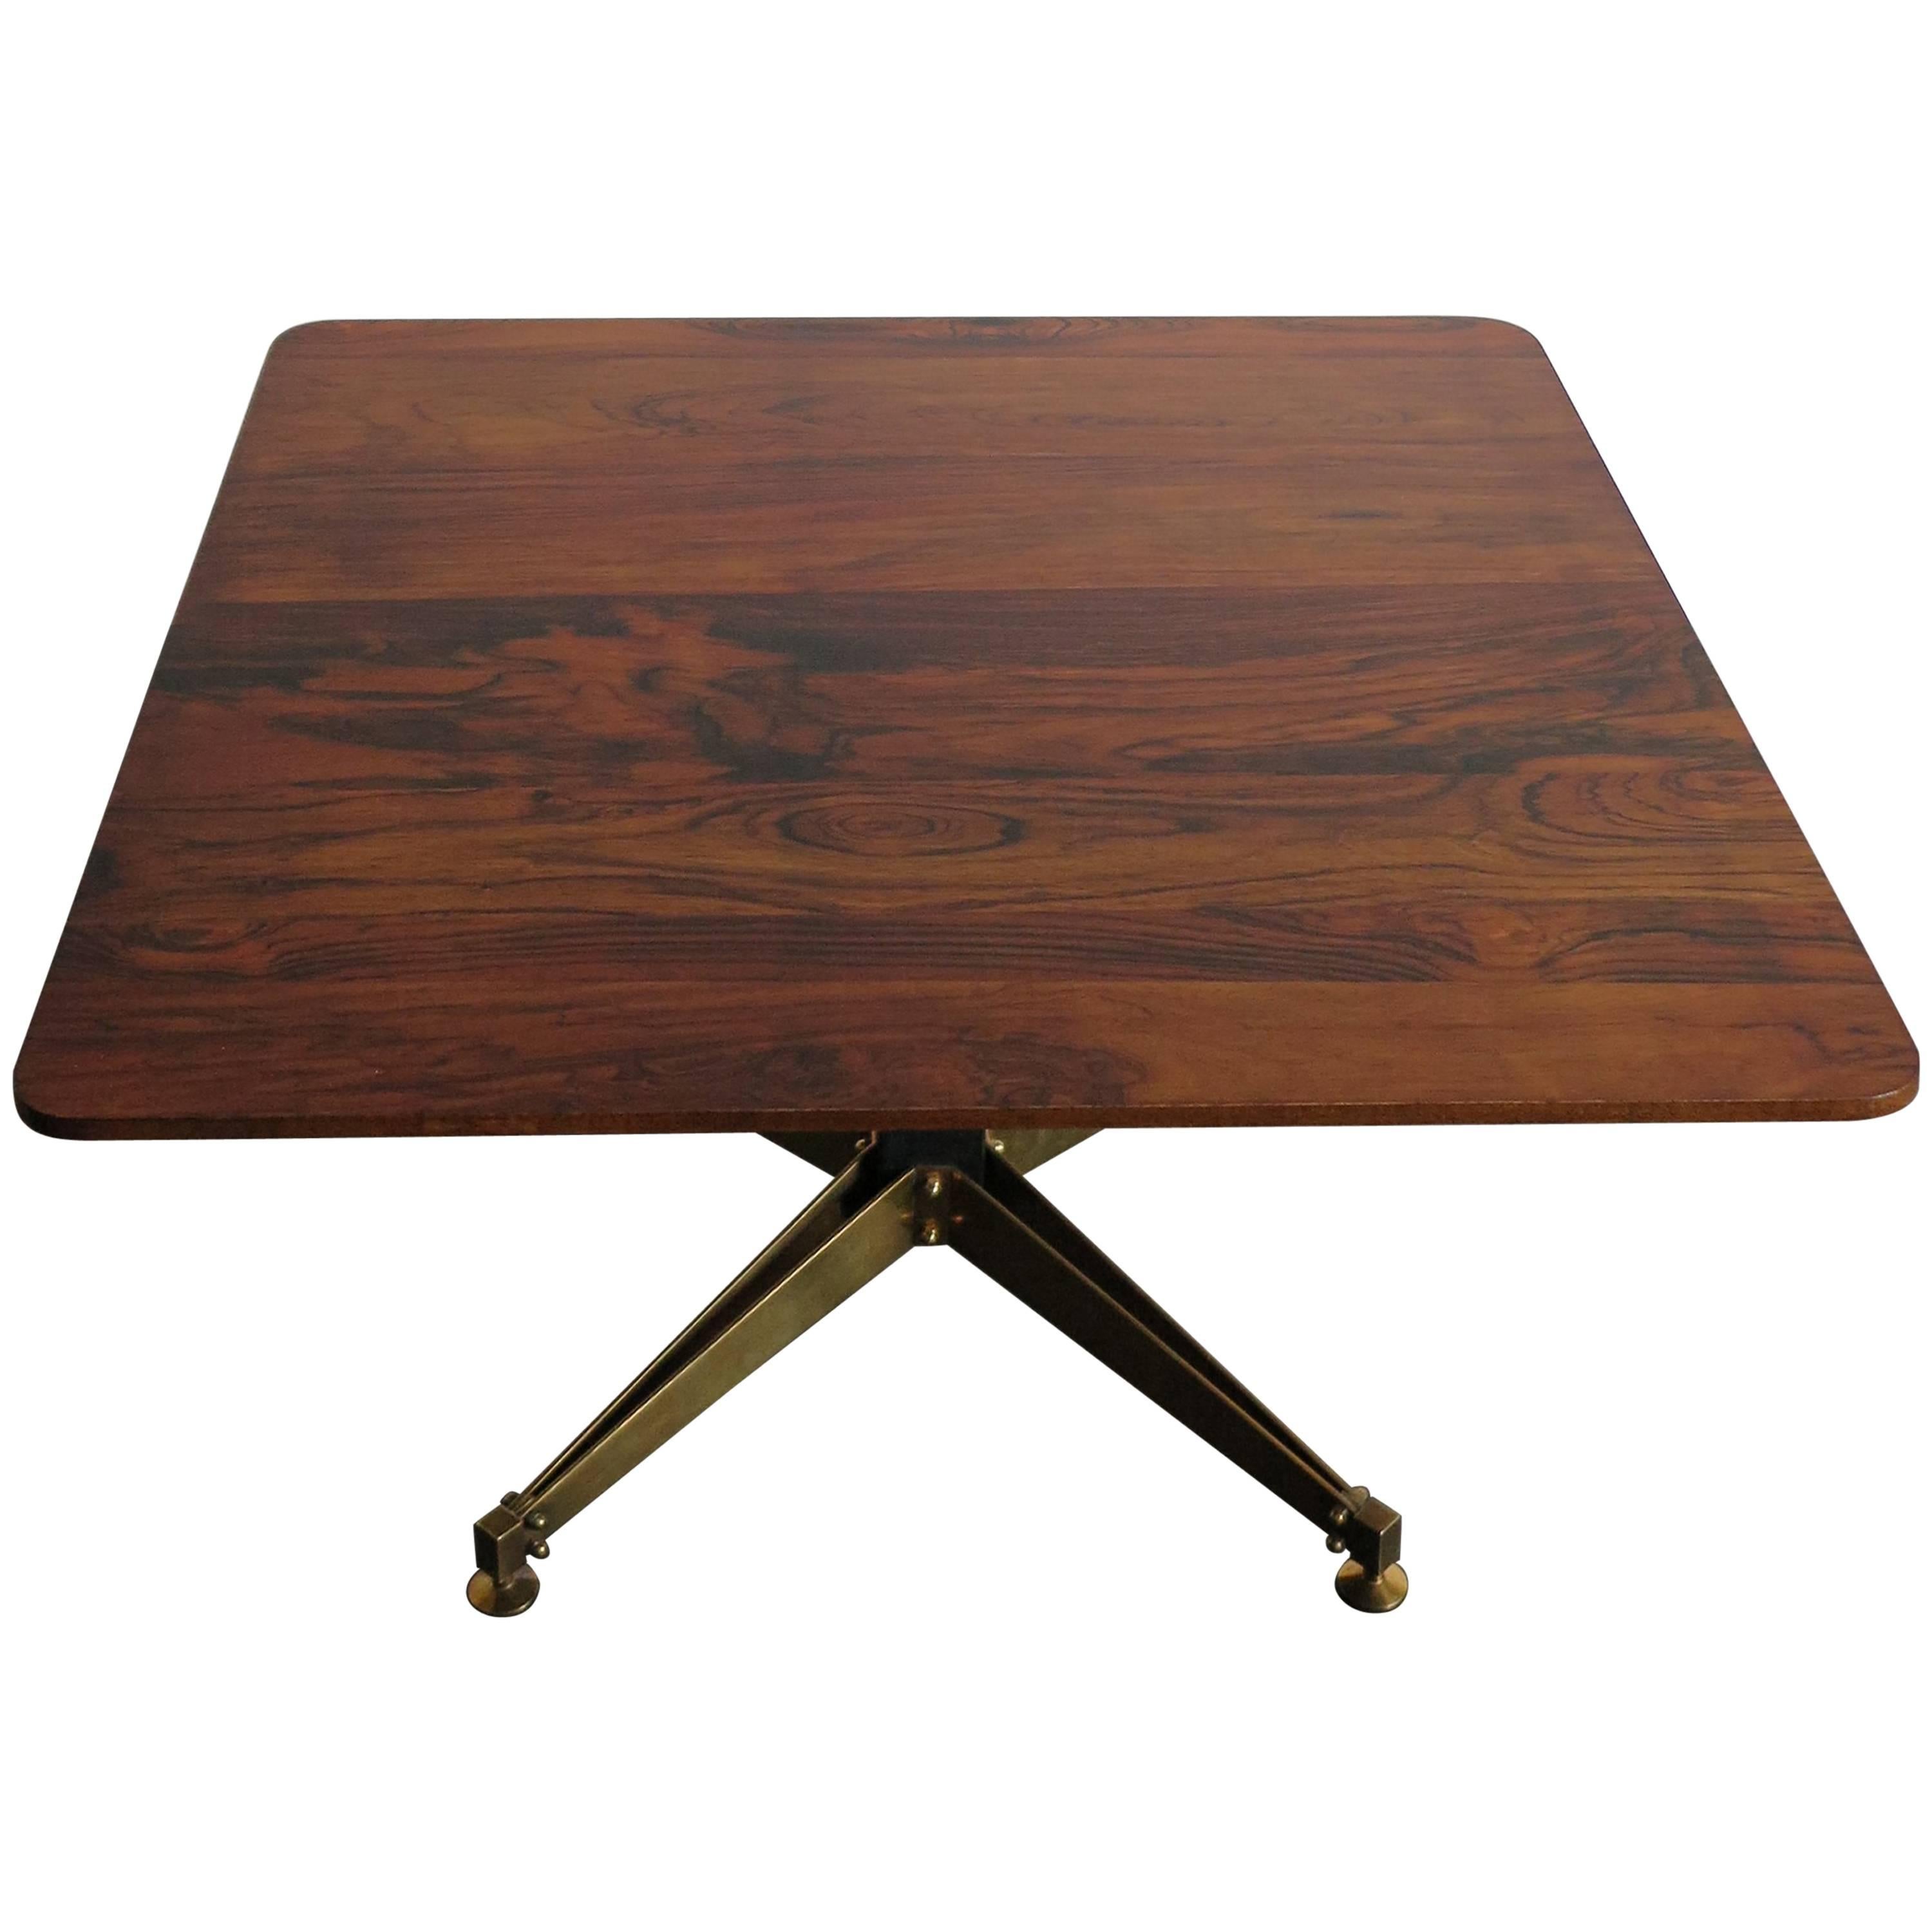 1950s Italian Square Rosewood and Brass Midcentury Modern Design Coffee Table